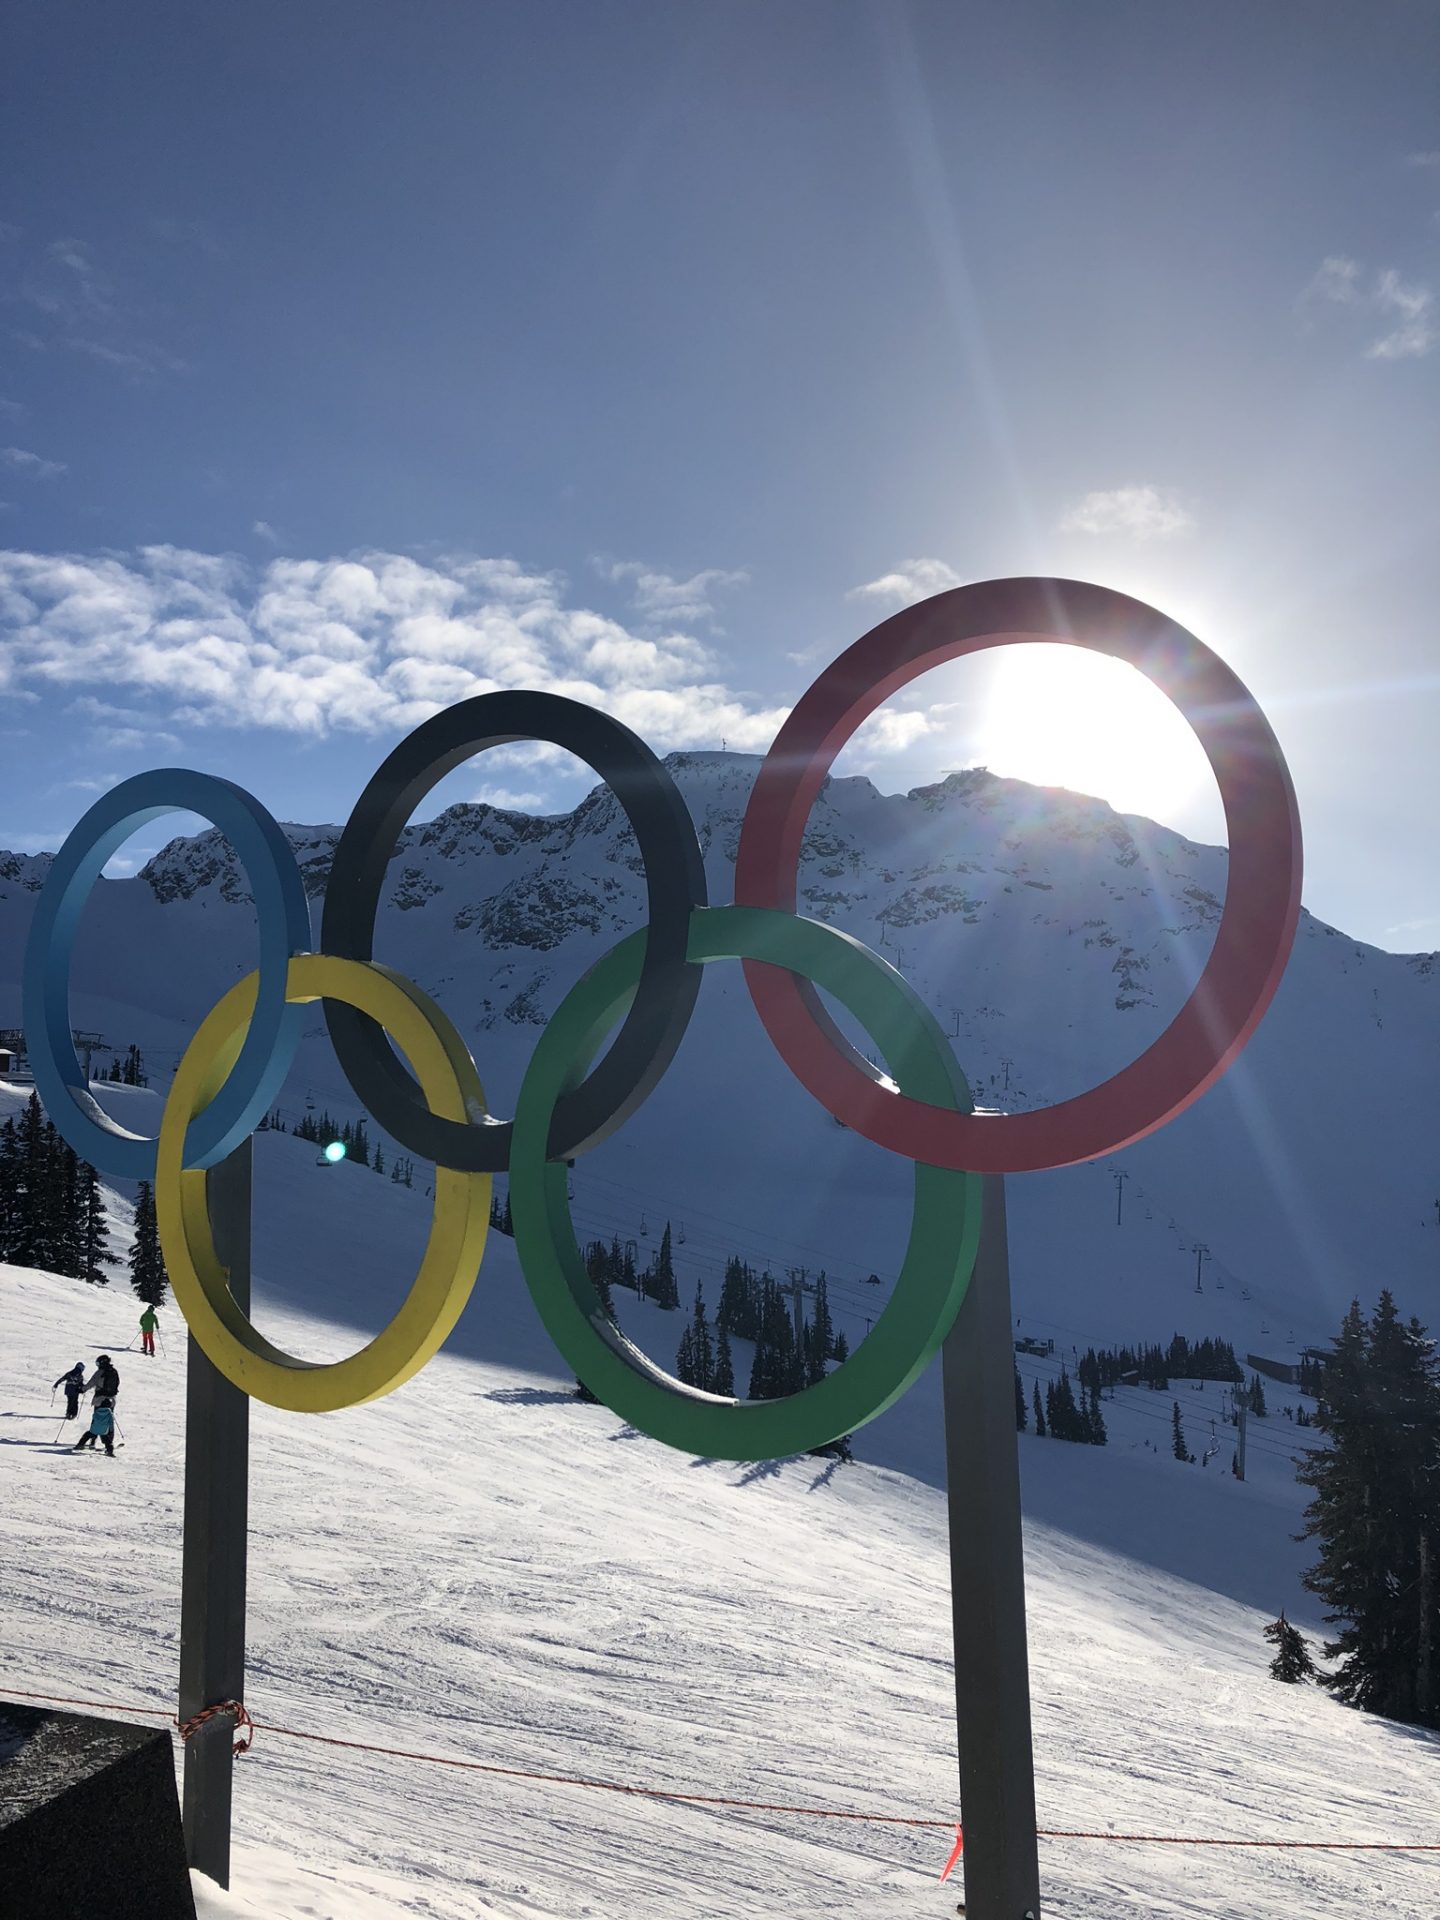 Olympic rings at the top of Whistler mountain, British Columbia